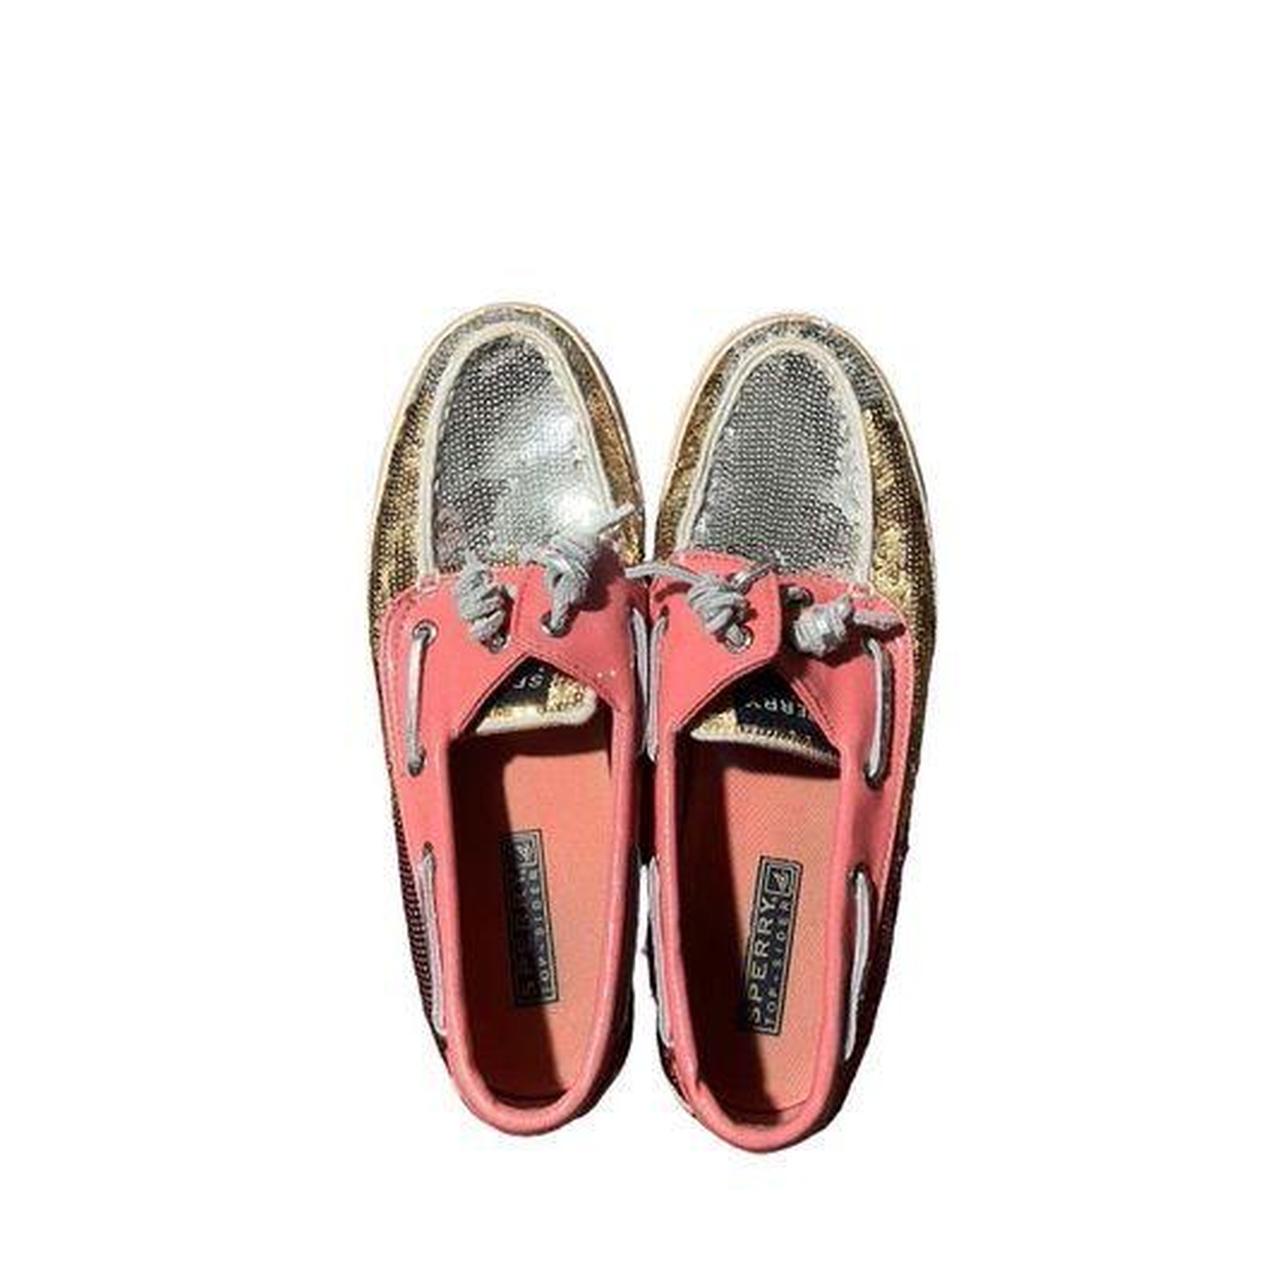 Sperry Women's Pink and Silver Loafers